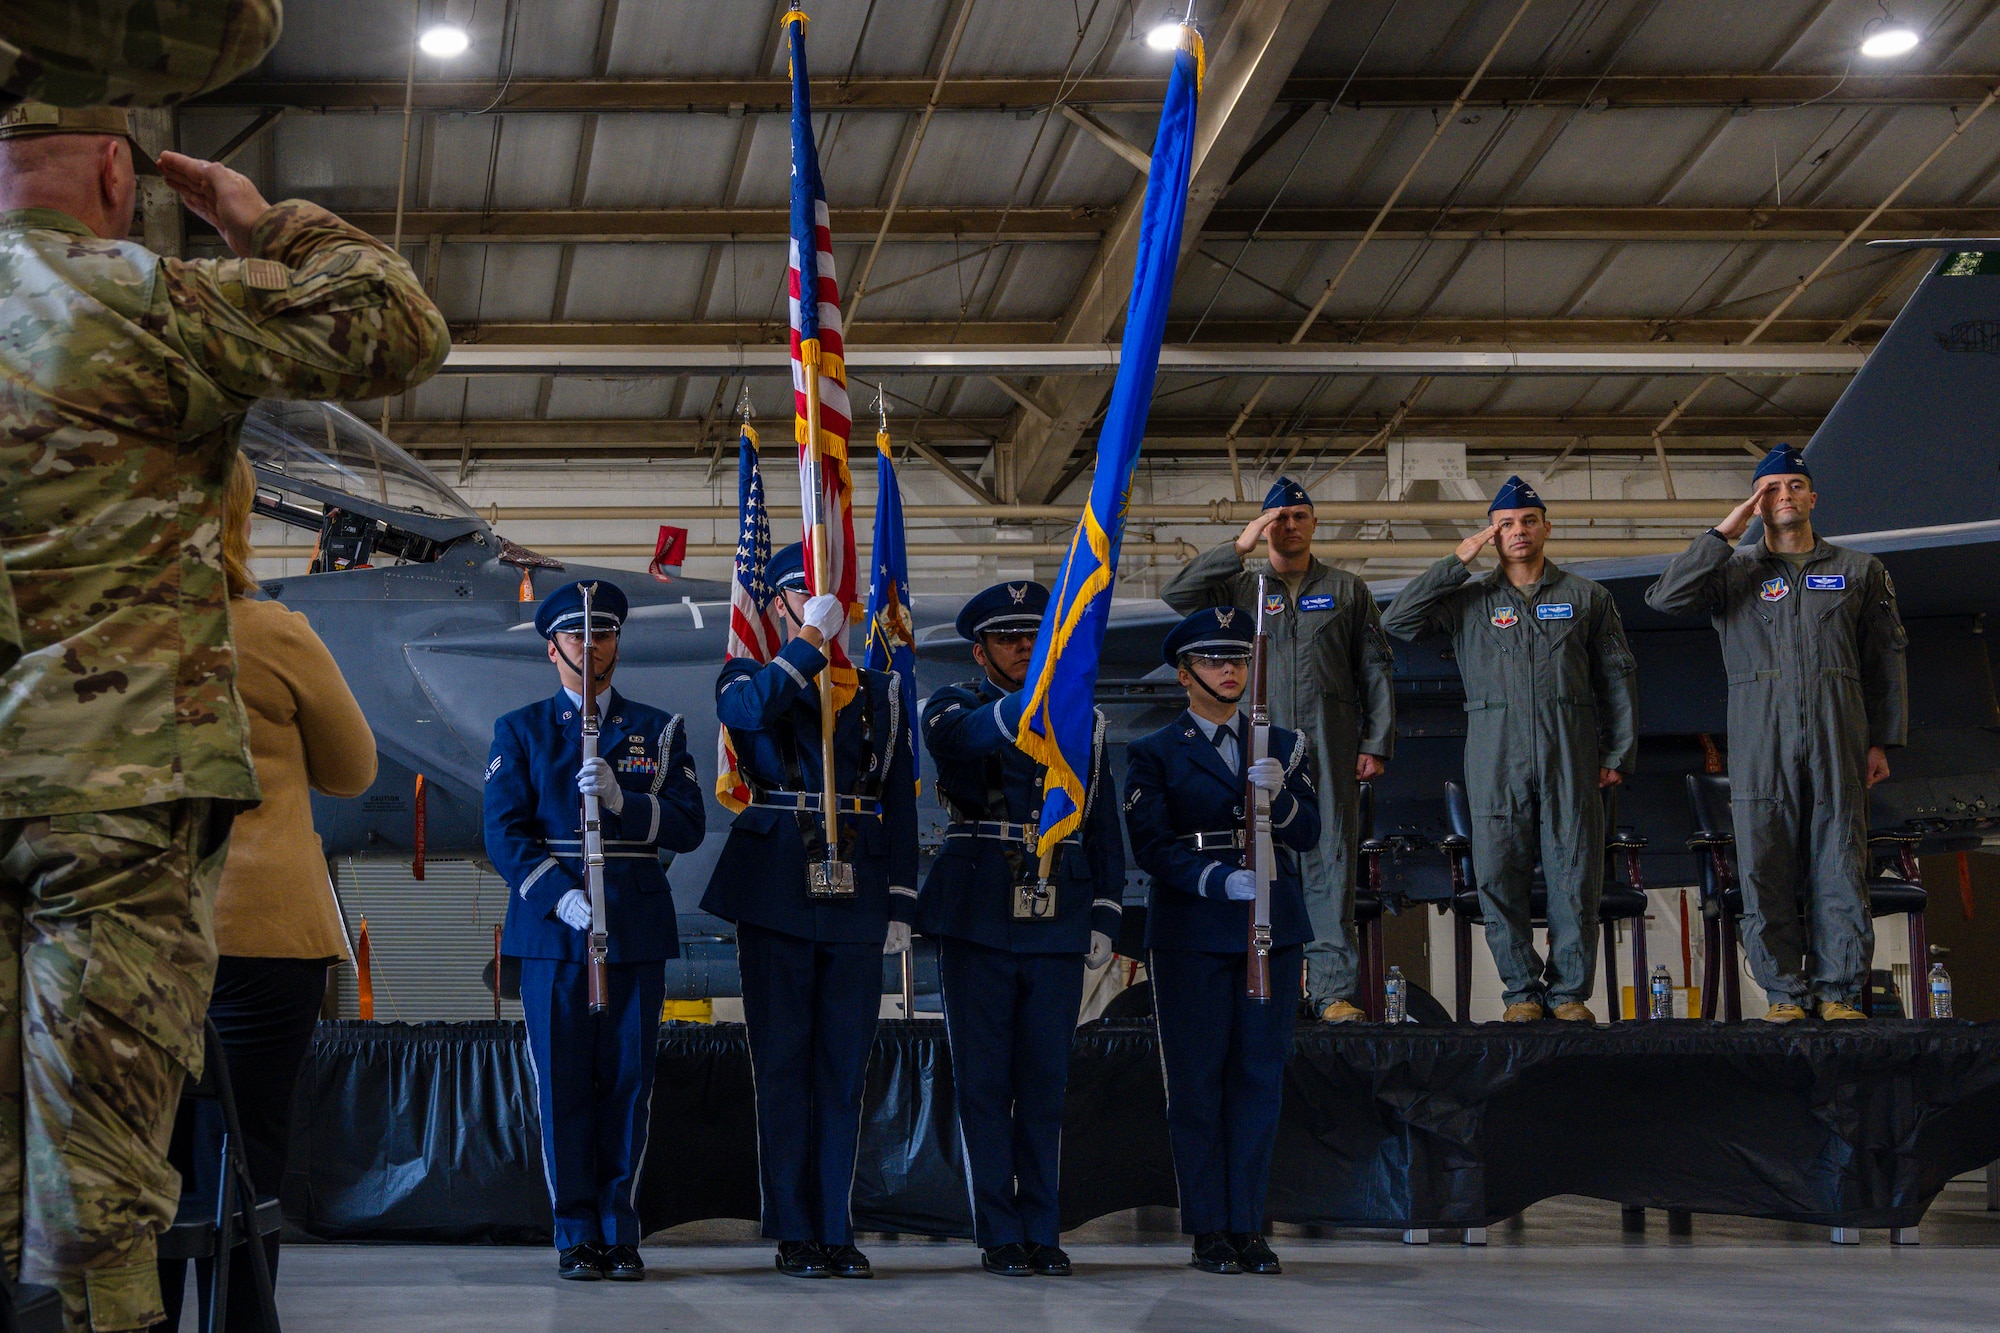 The ceremony was conducted to commemorate the passing of command of the 4th Operations Group from Col. Michael Alfaro, former commander of the 4th OG. (U.S. Air Force photo by Senior Airman Kylie Barrow)